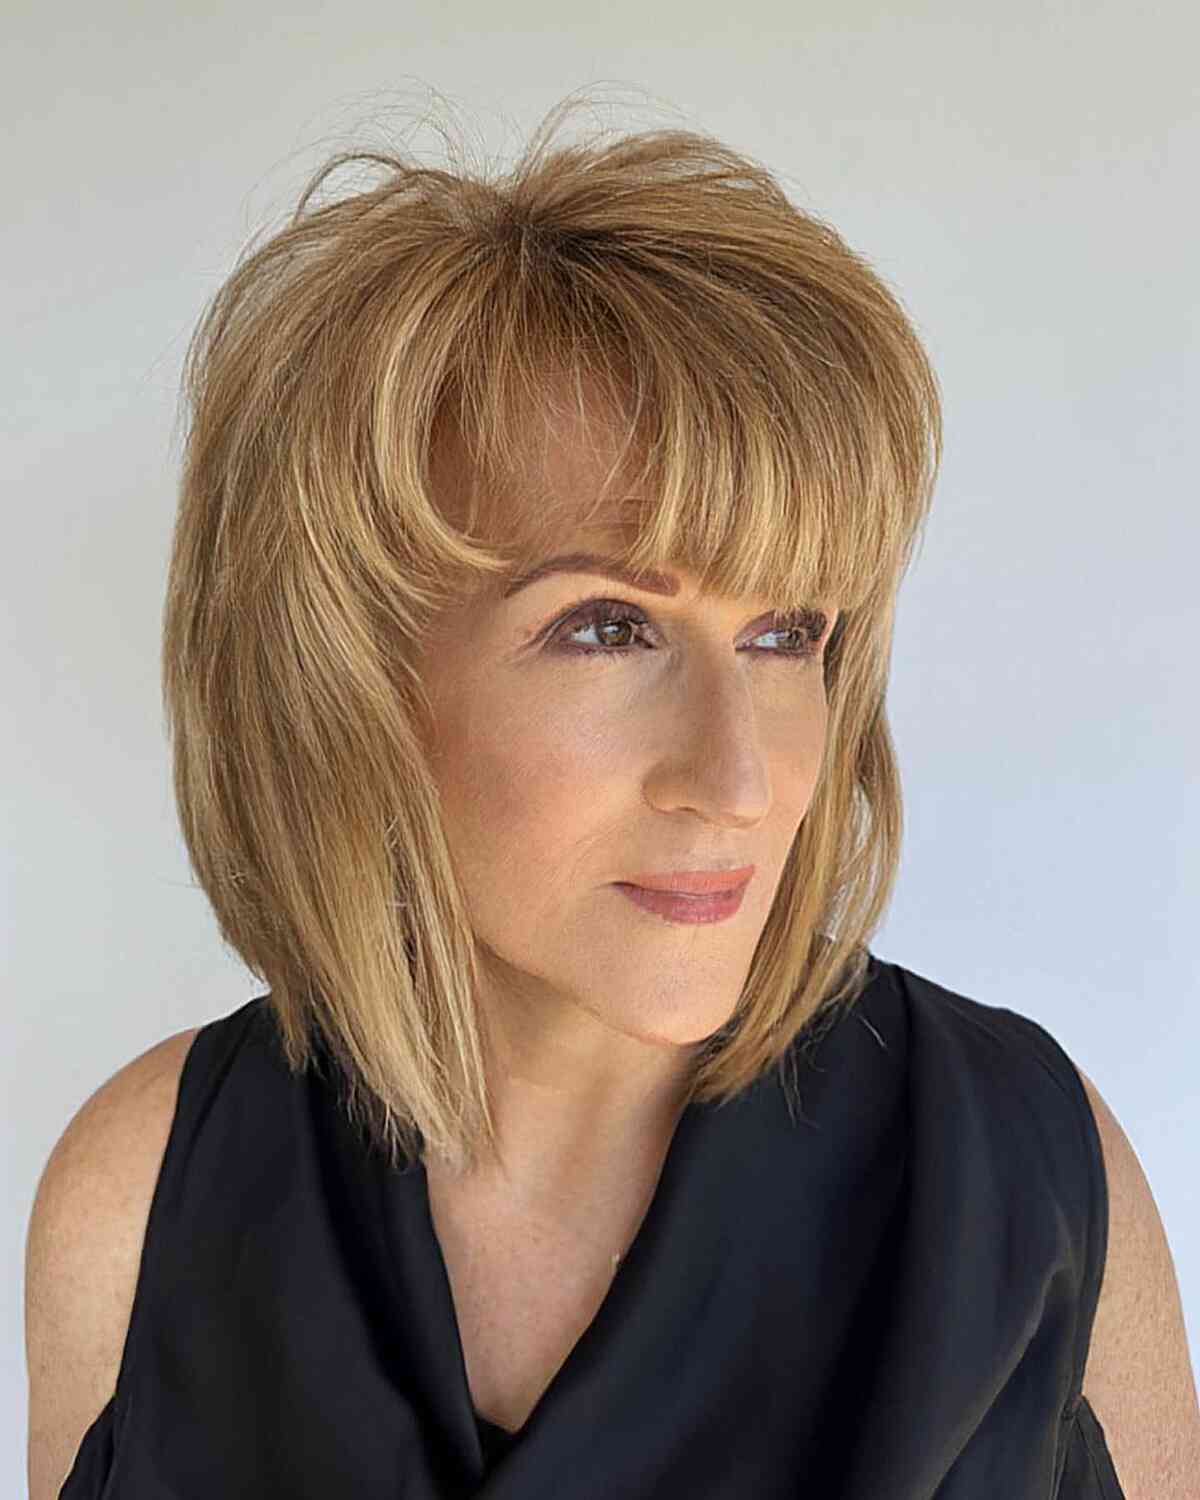 15 Must-Try Hairstyles for Women Over 40 - Best Hairstyles for